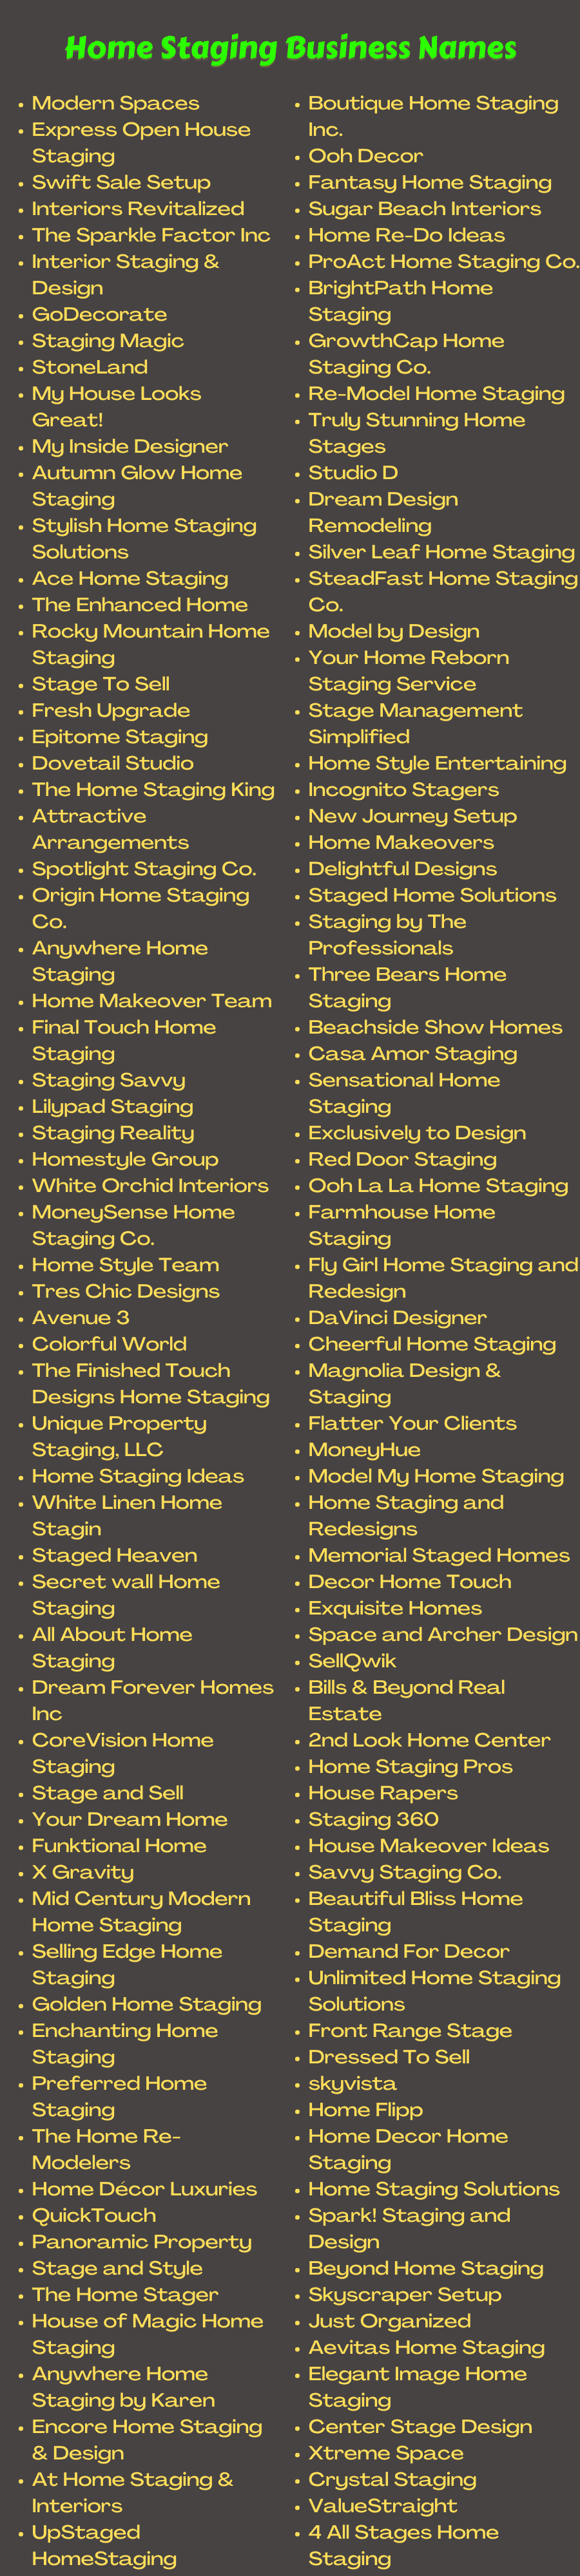 400 Creative Home Staging Business Names